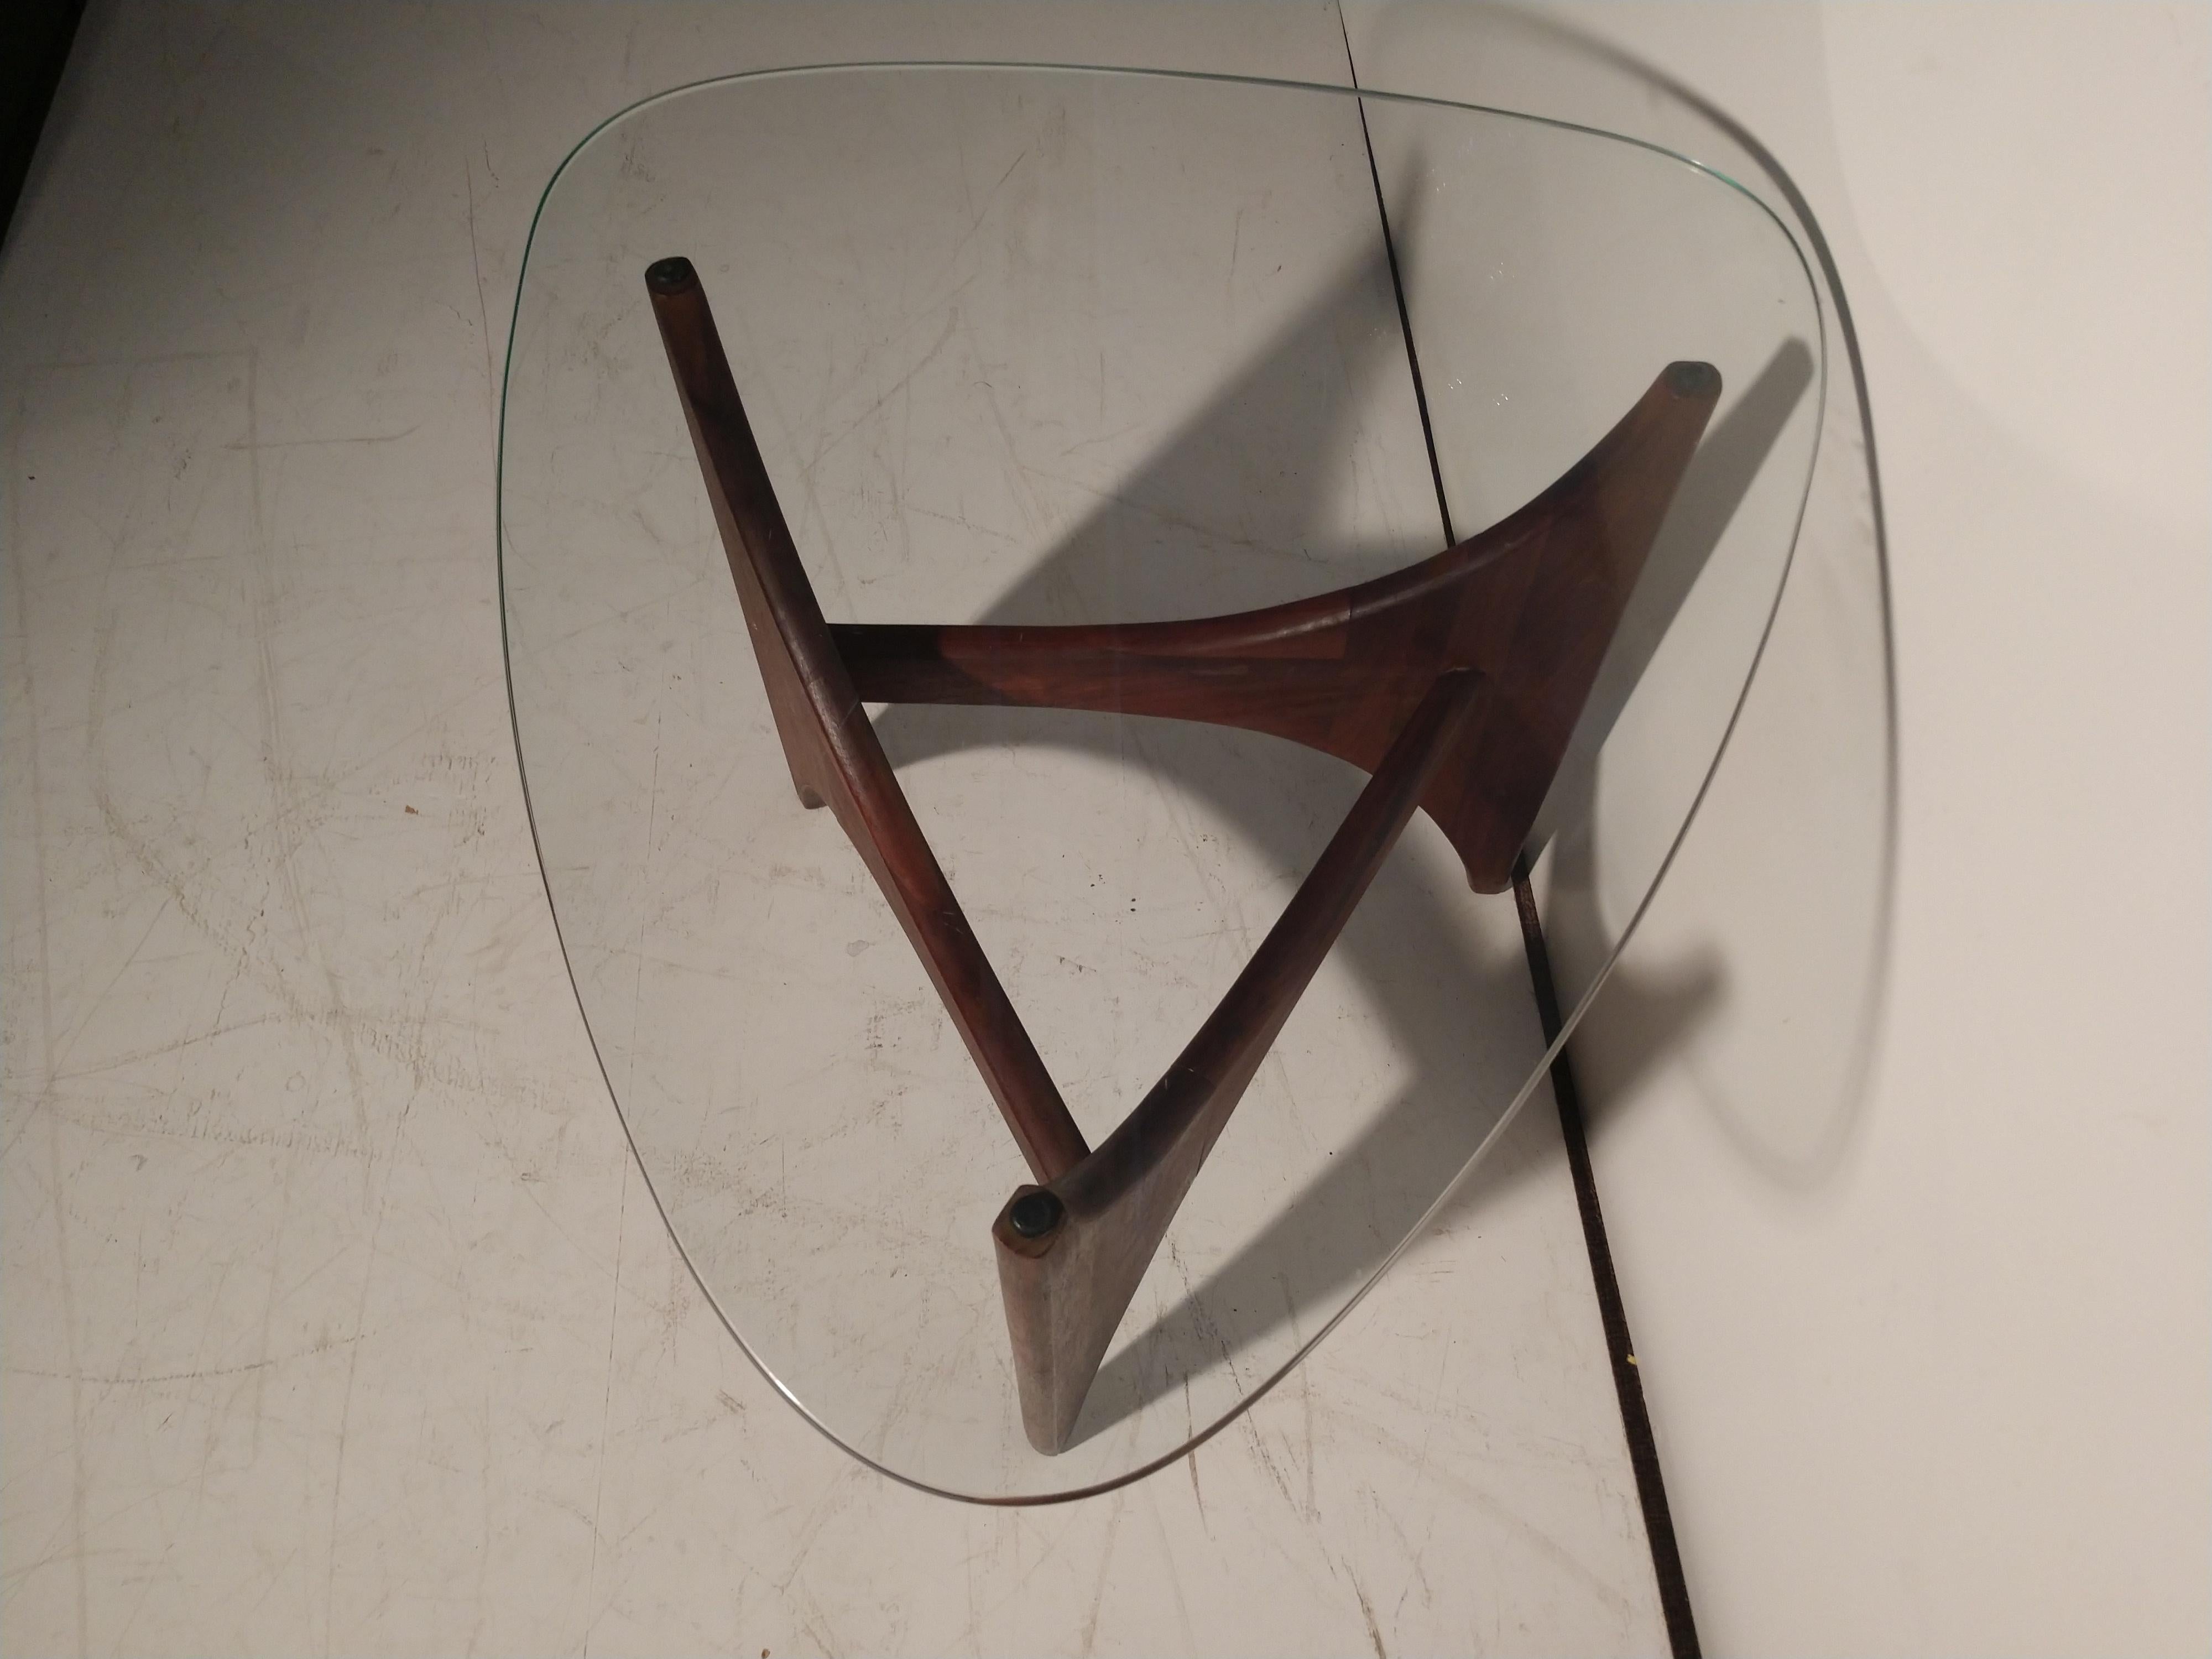 Fabulous Adrian Pearsall end table or cocktail table with a sculptural base and a glass top in the form of a guitar pick. In very good vintage condition, very tight and sturdy. Glass is perfect.